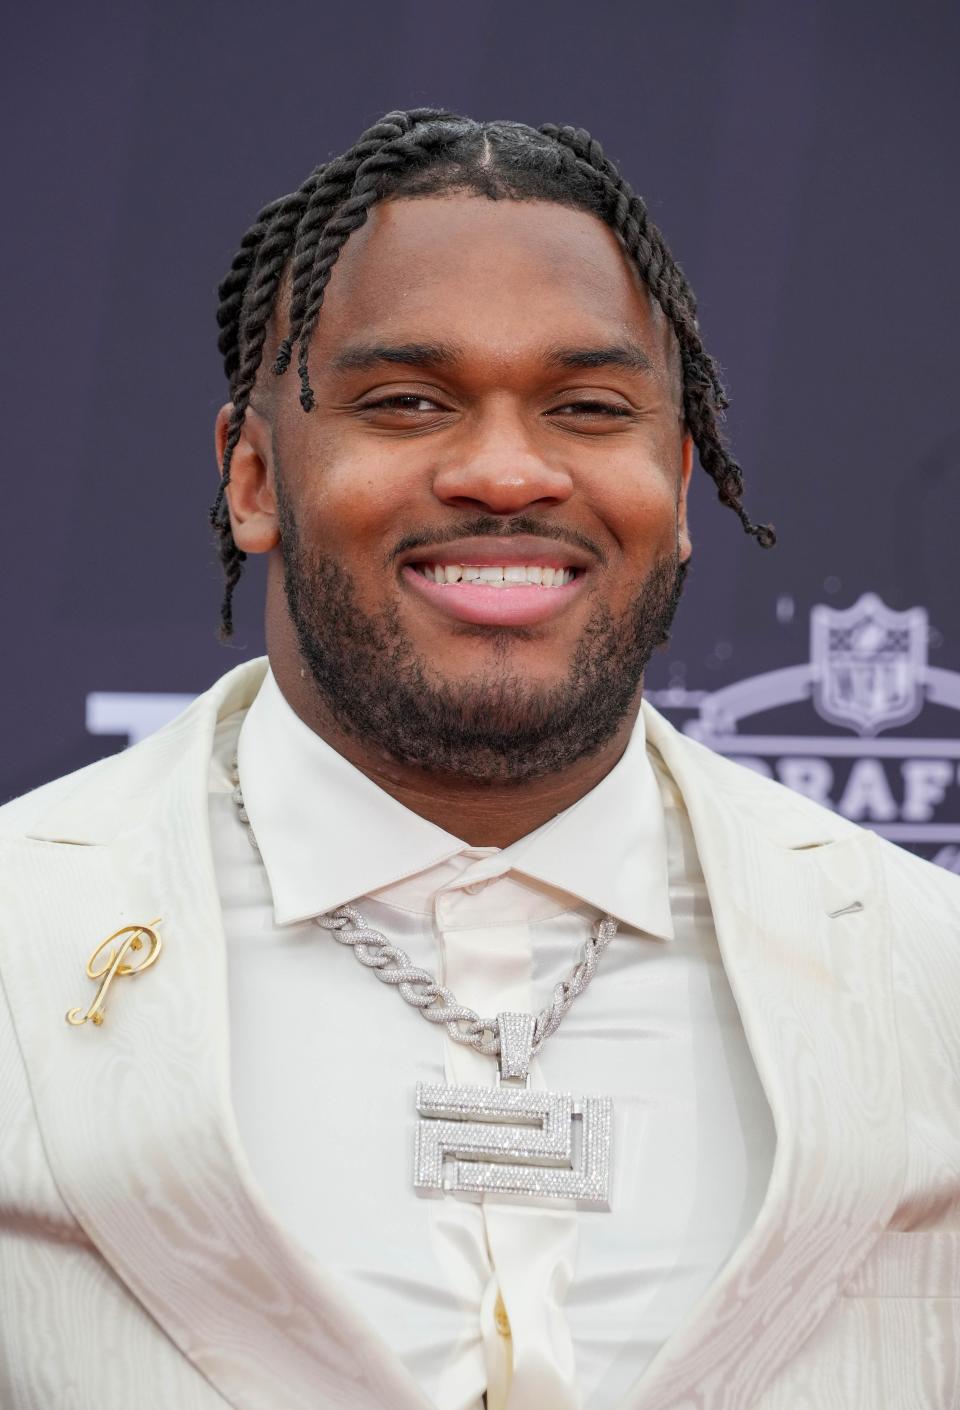 Ohio State tackle Paris Johnson Jr. poses for a photo on the NFL Draft Red Carpet before the first round of the 2023 NFL Draft at Union Station in Kansas City, MO, on April 27, 2023.